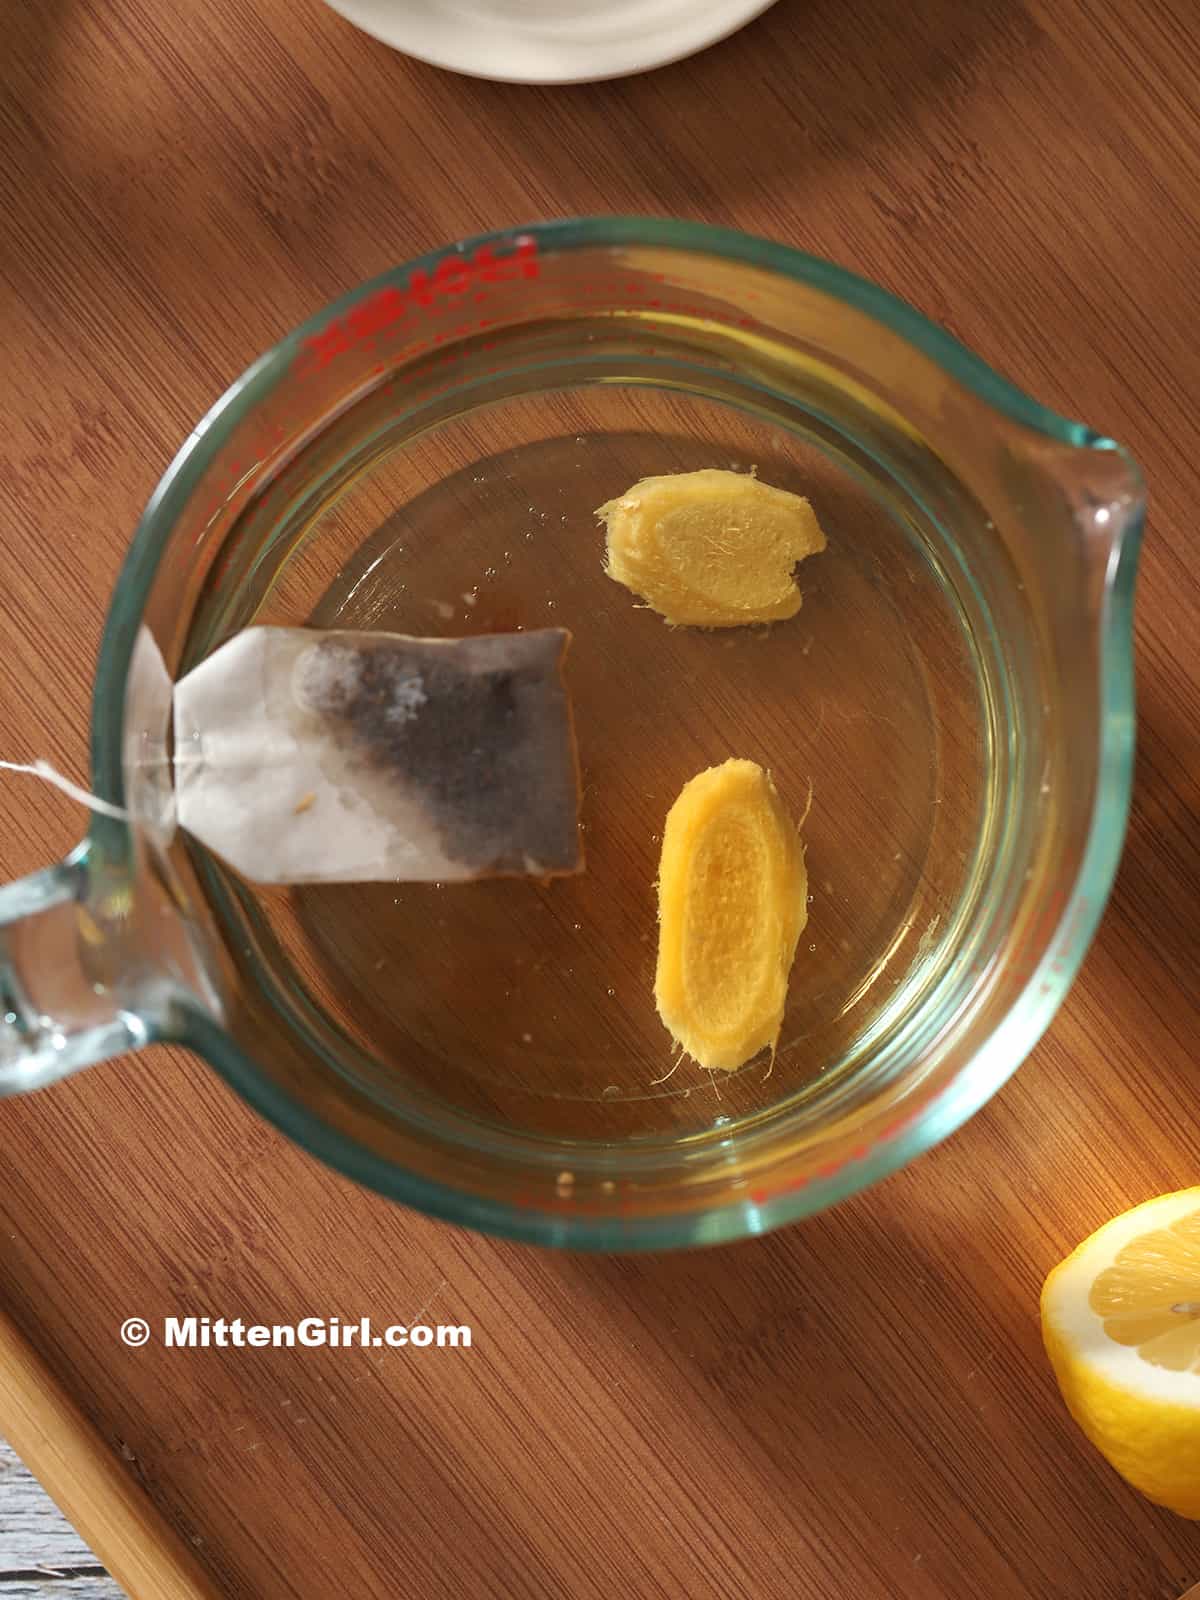 Ginger root and a tea bag floating in hot water.